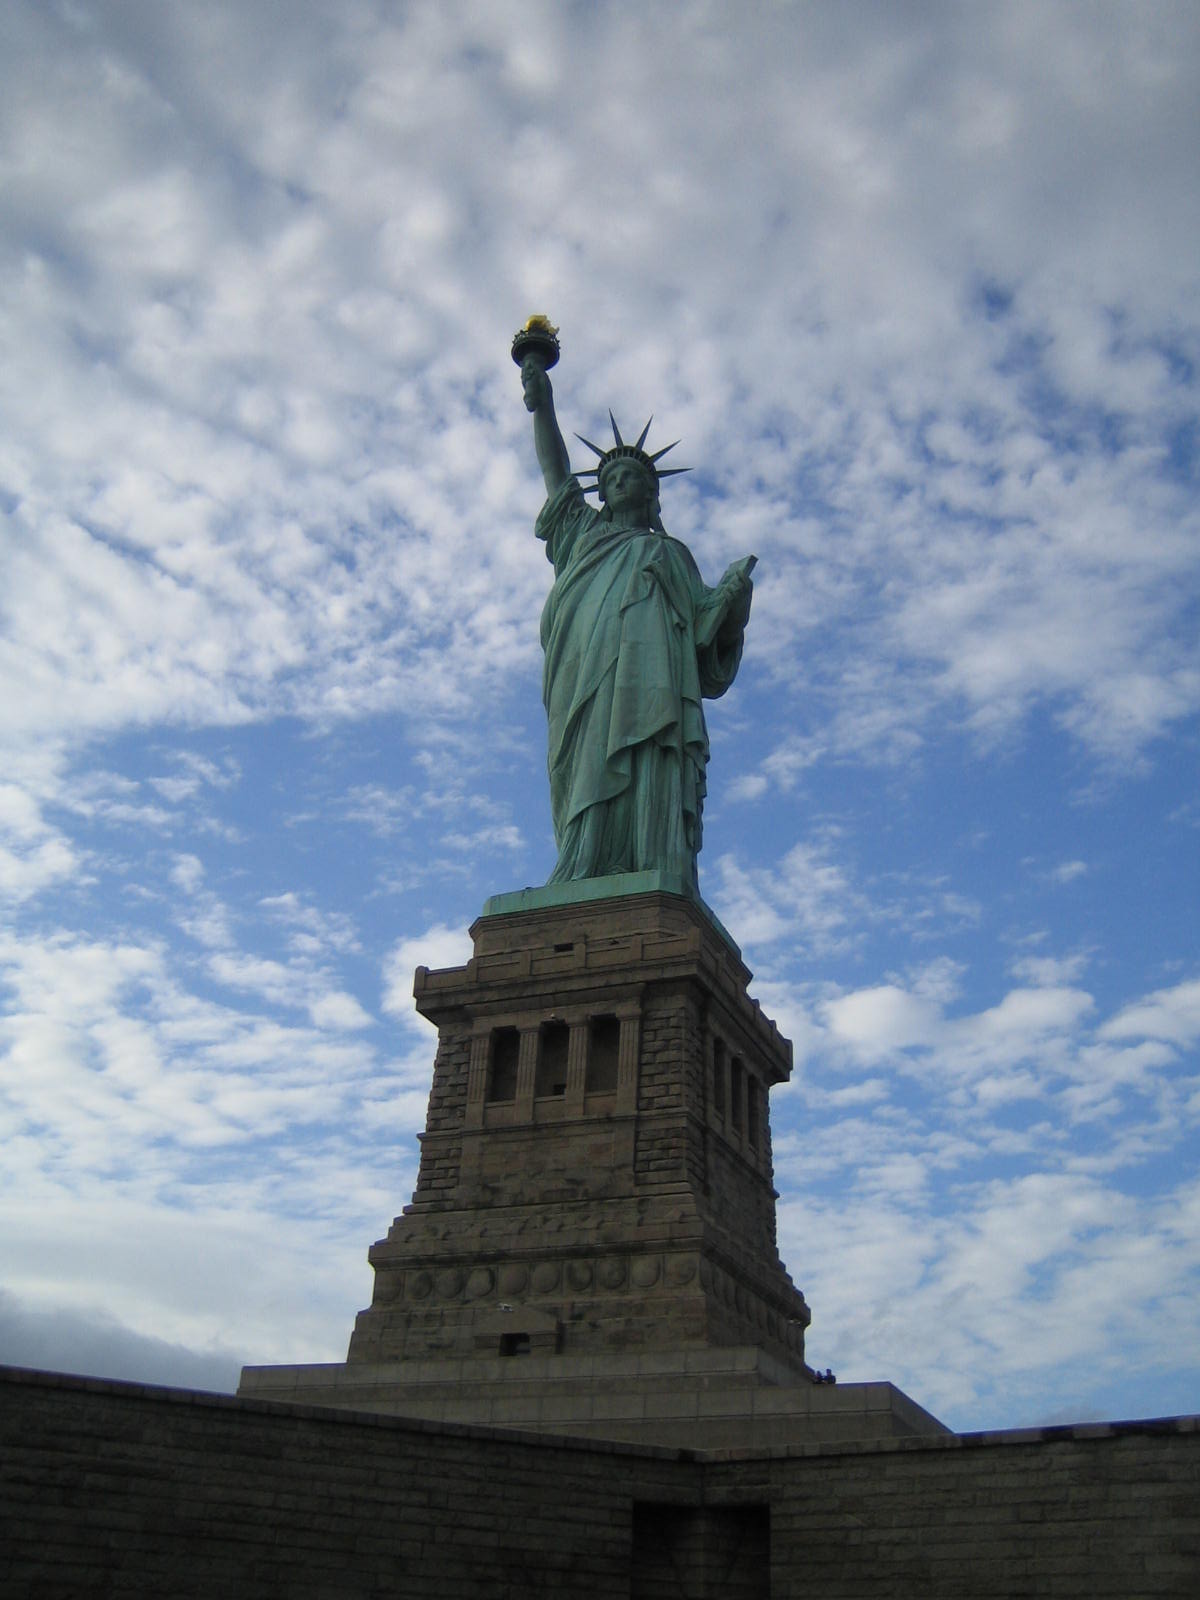 a statue of liberty against a cloudy blue sky